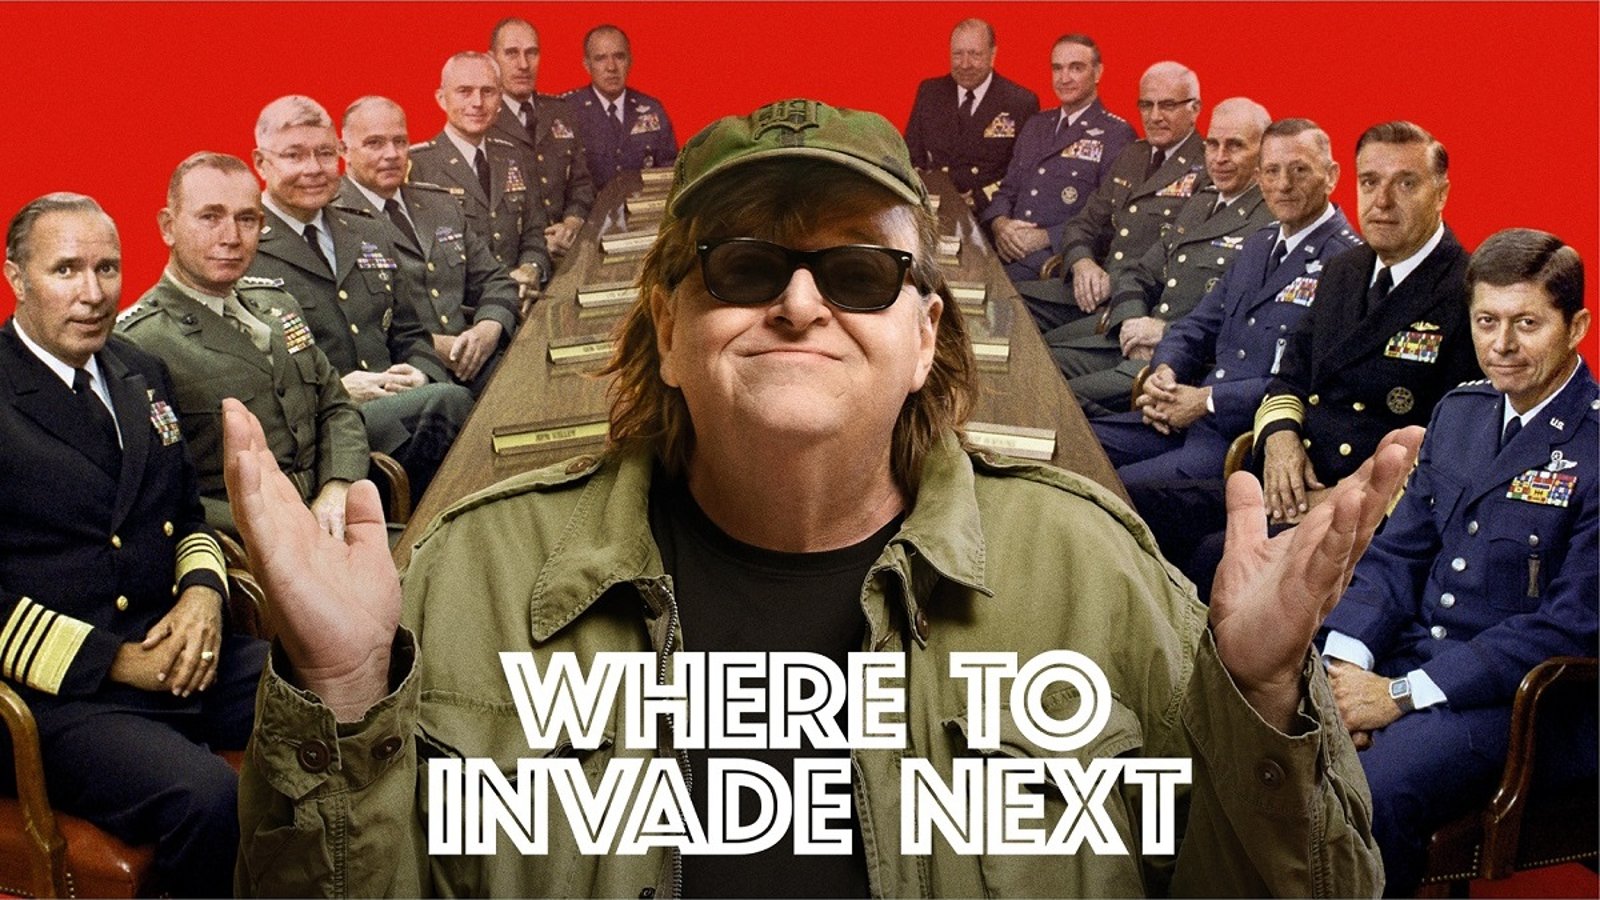 Where to Invade Next - Commandeering Ideas to Improve Prospects in America